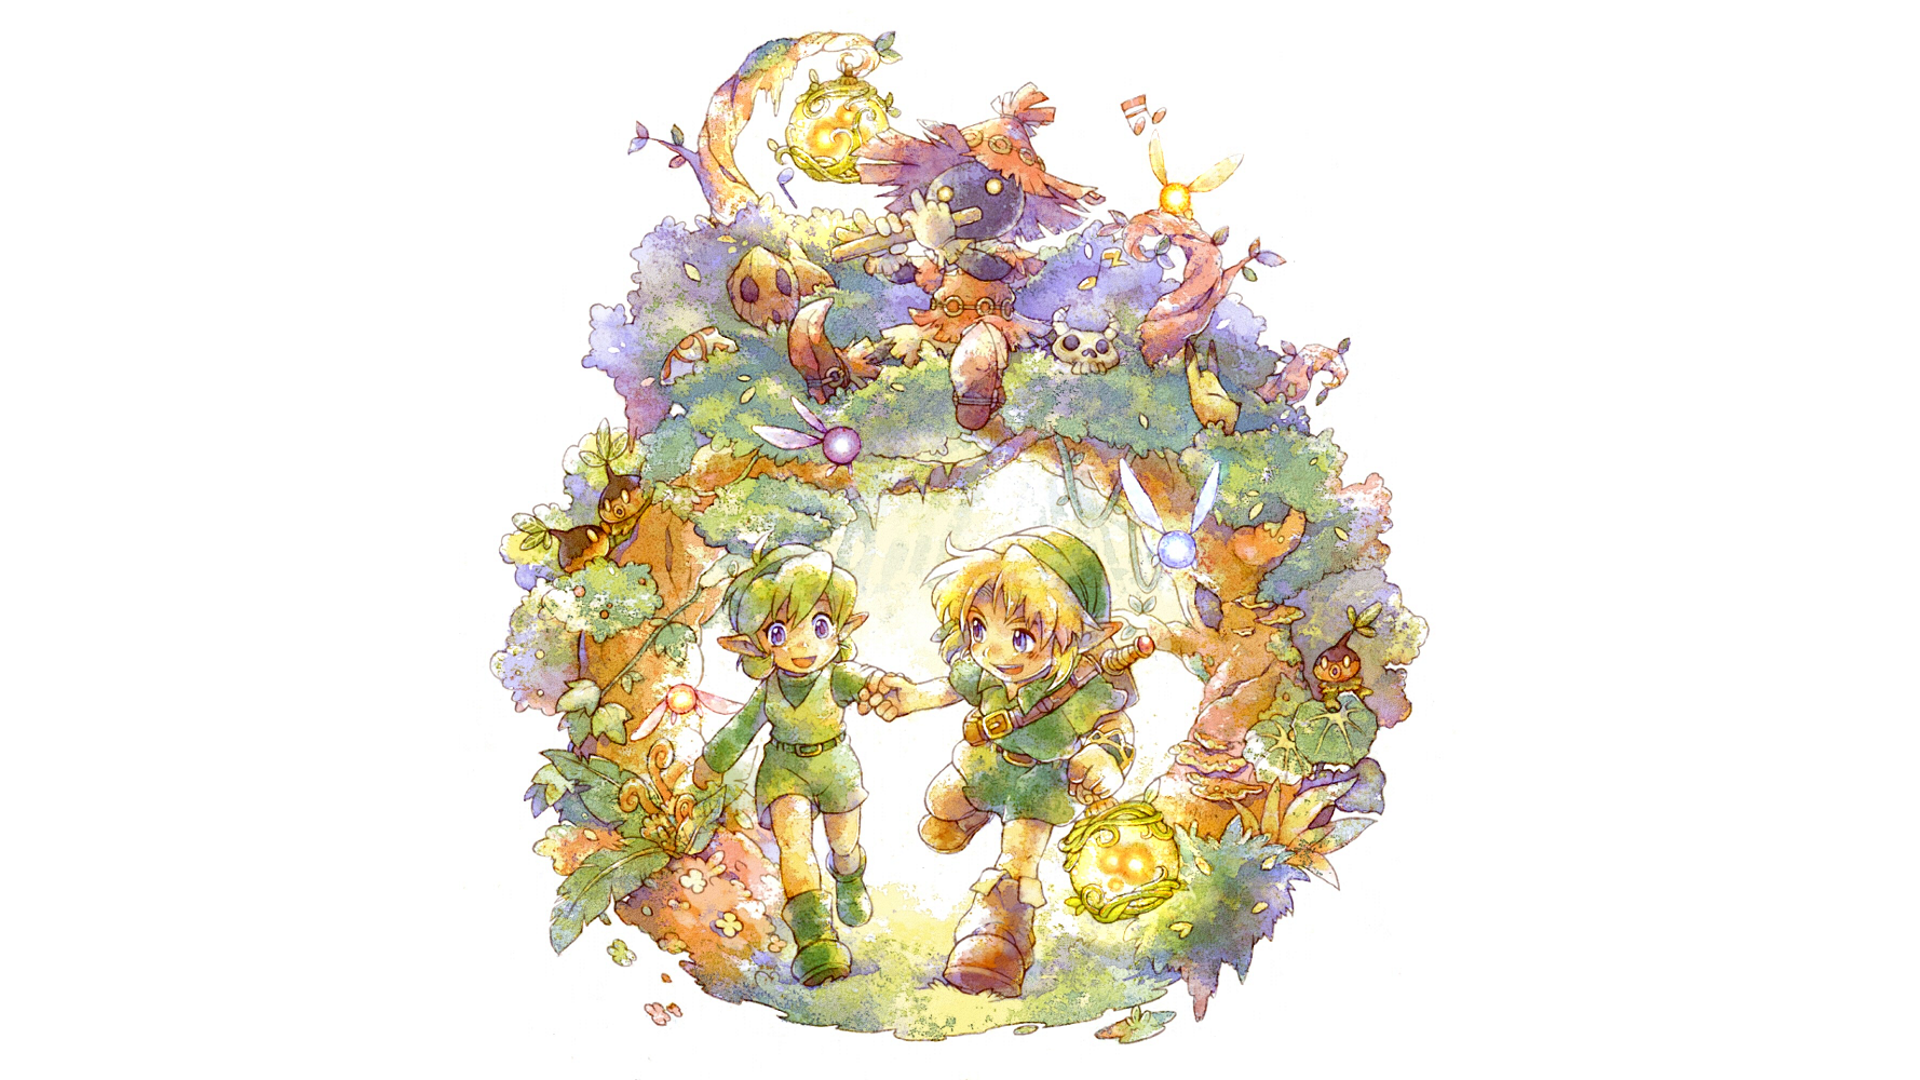 General 1920x1080 Link Saria skull kid The Legend of Zelda watercolor anime Lost Woods white background